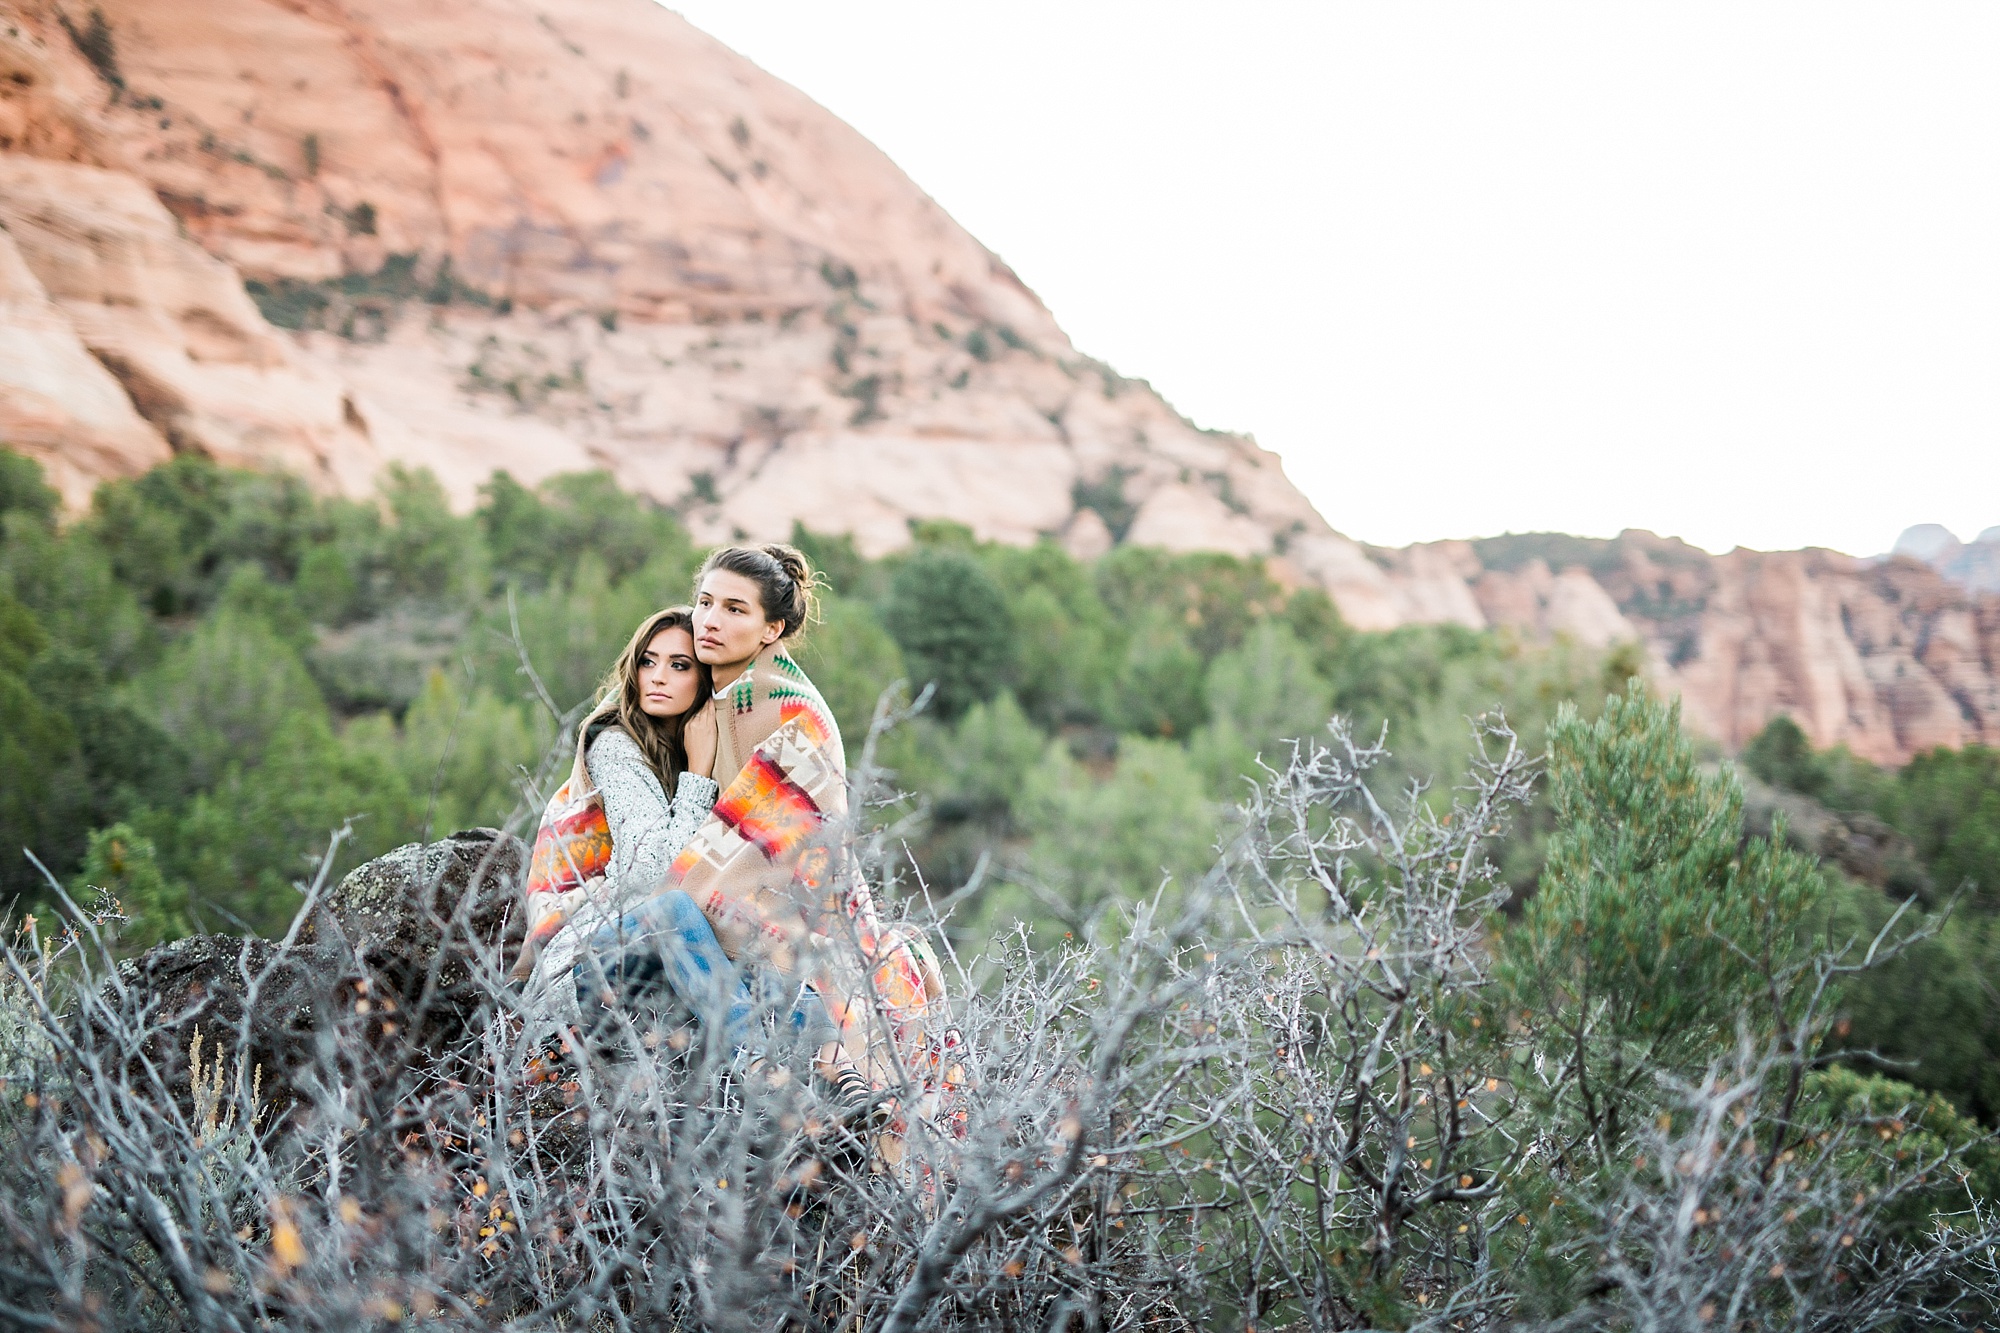 bree-and-andrew-zion-utah-hazel-and-lace-colorado-wedding-photography_0007